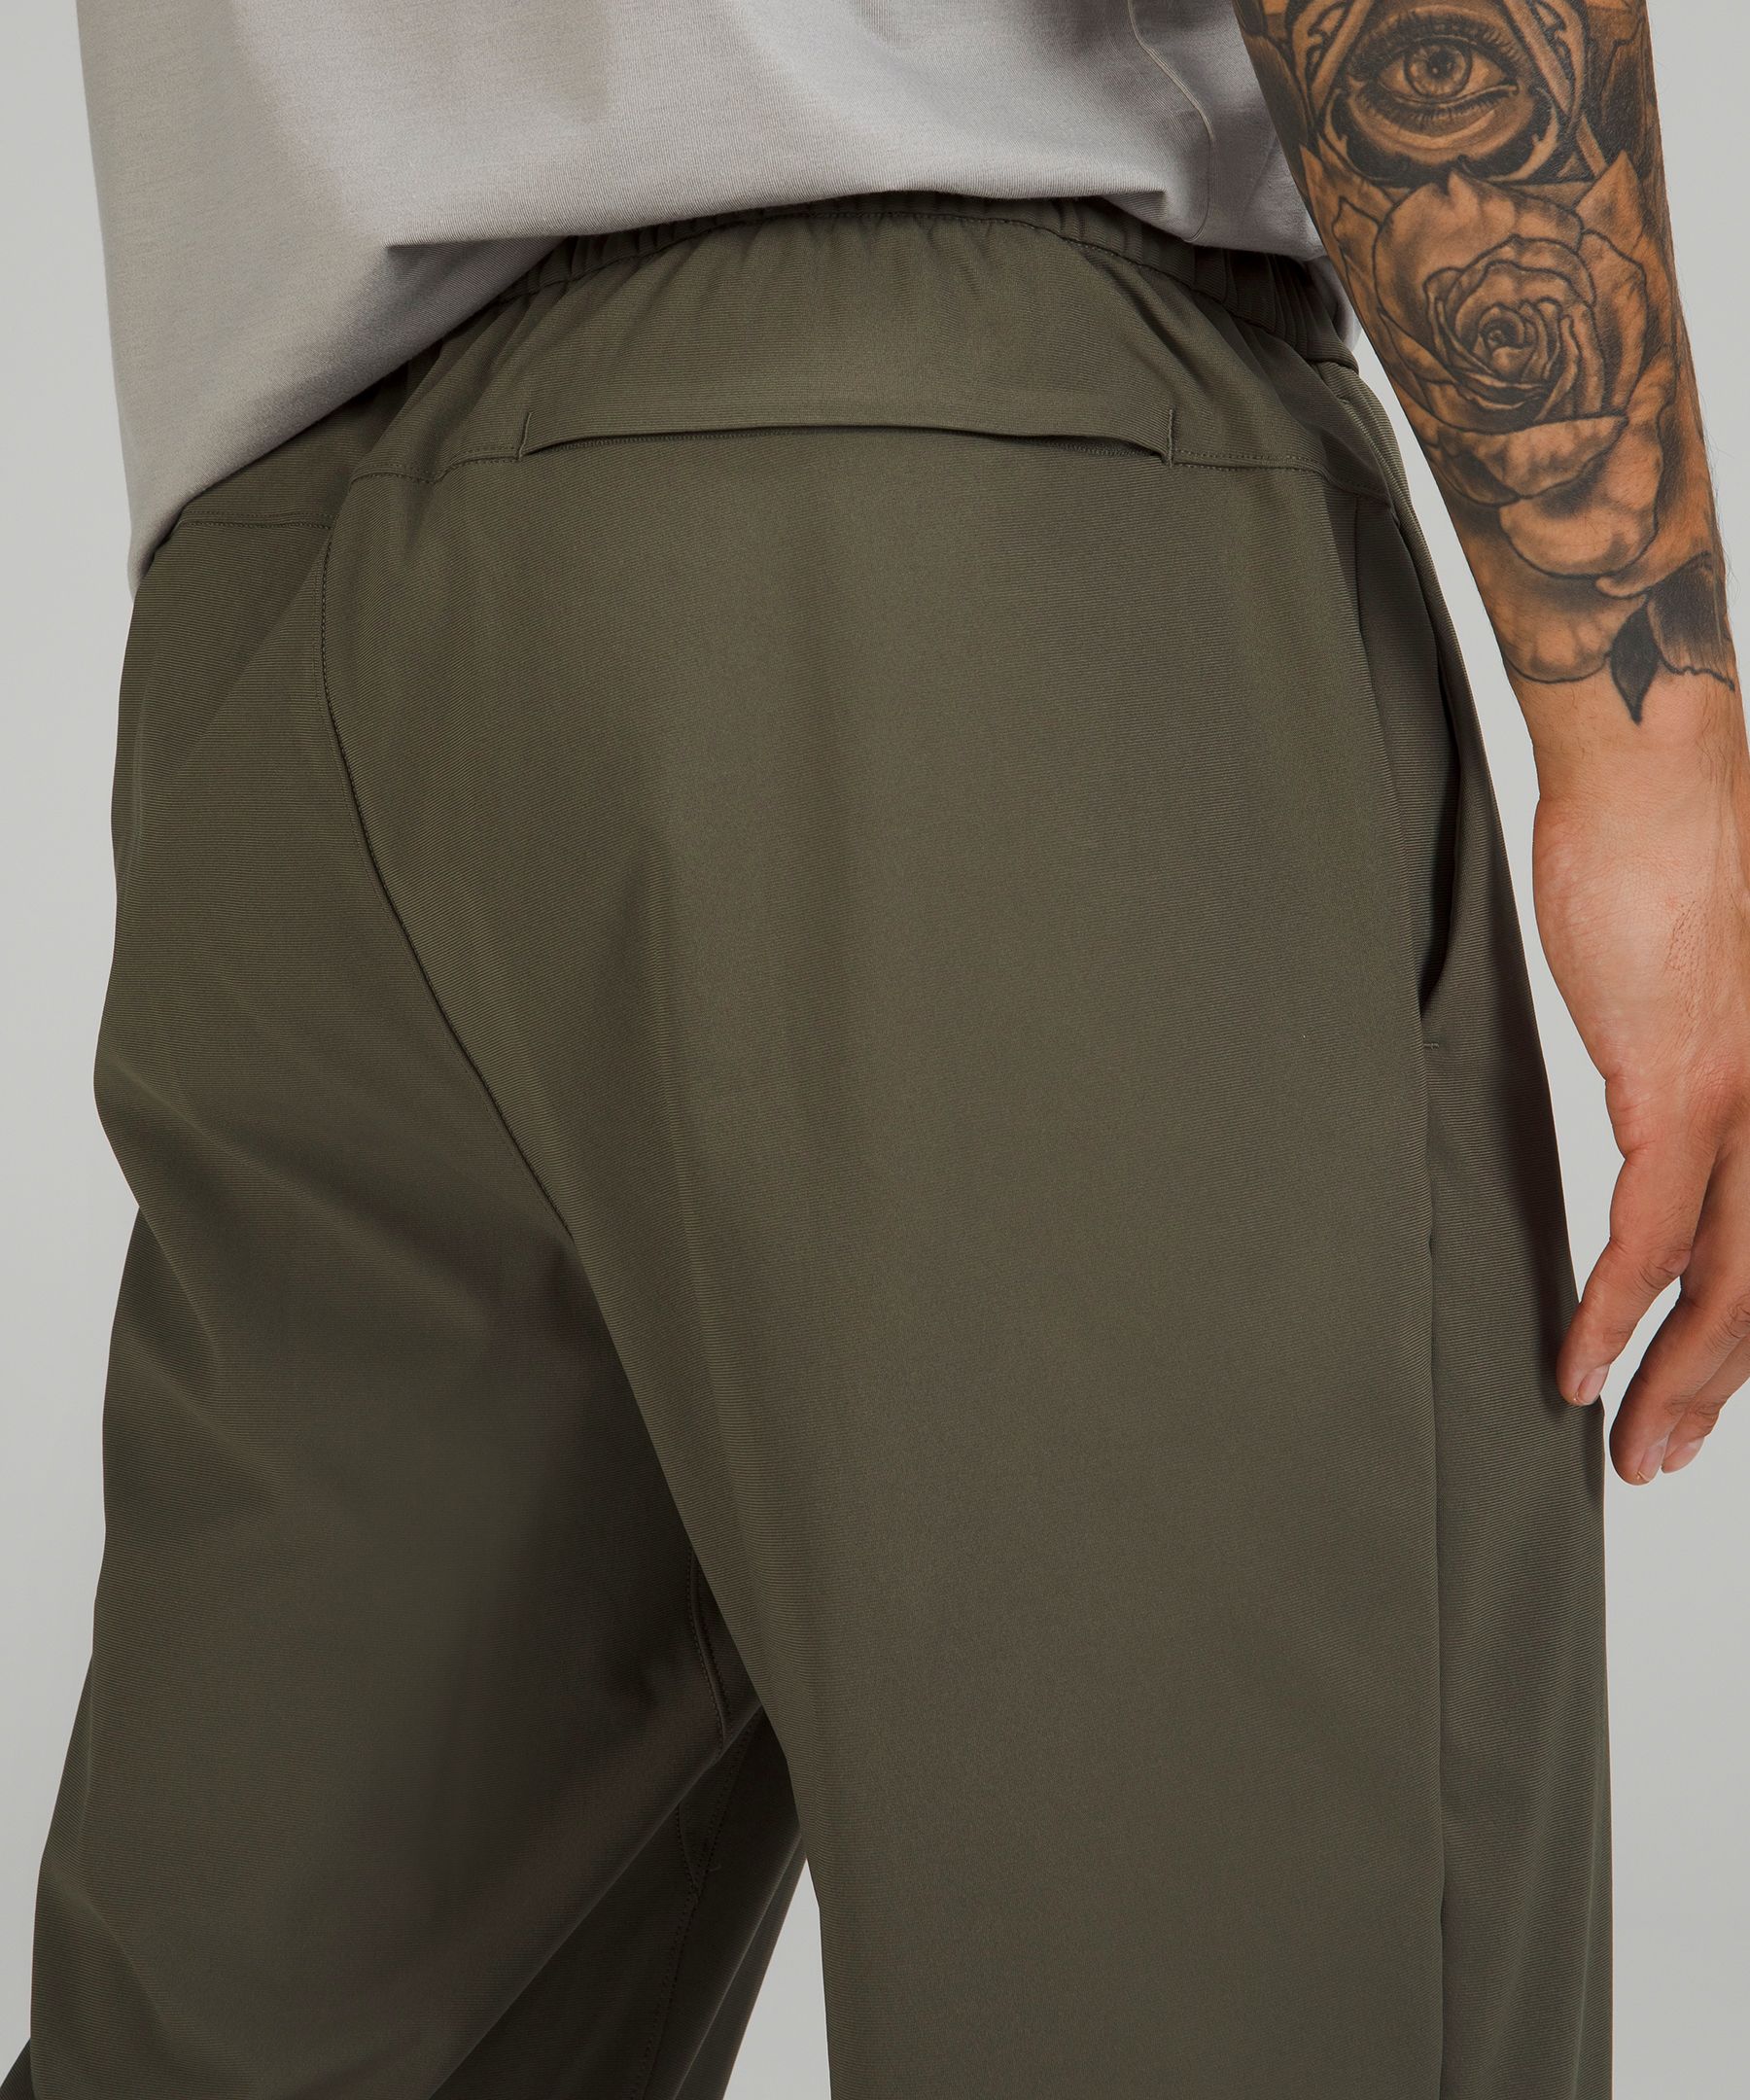 ABC Pull-On Pant *Shorter